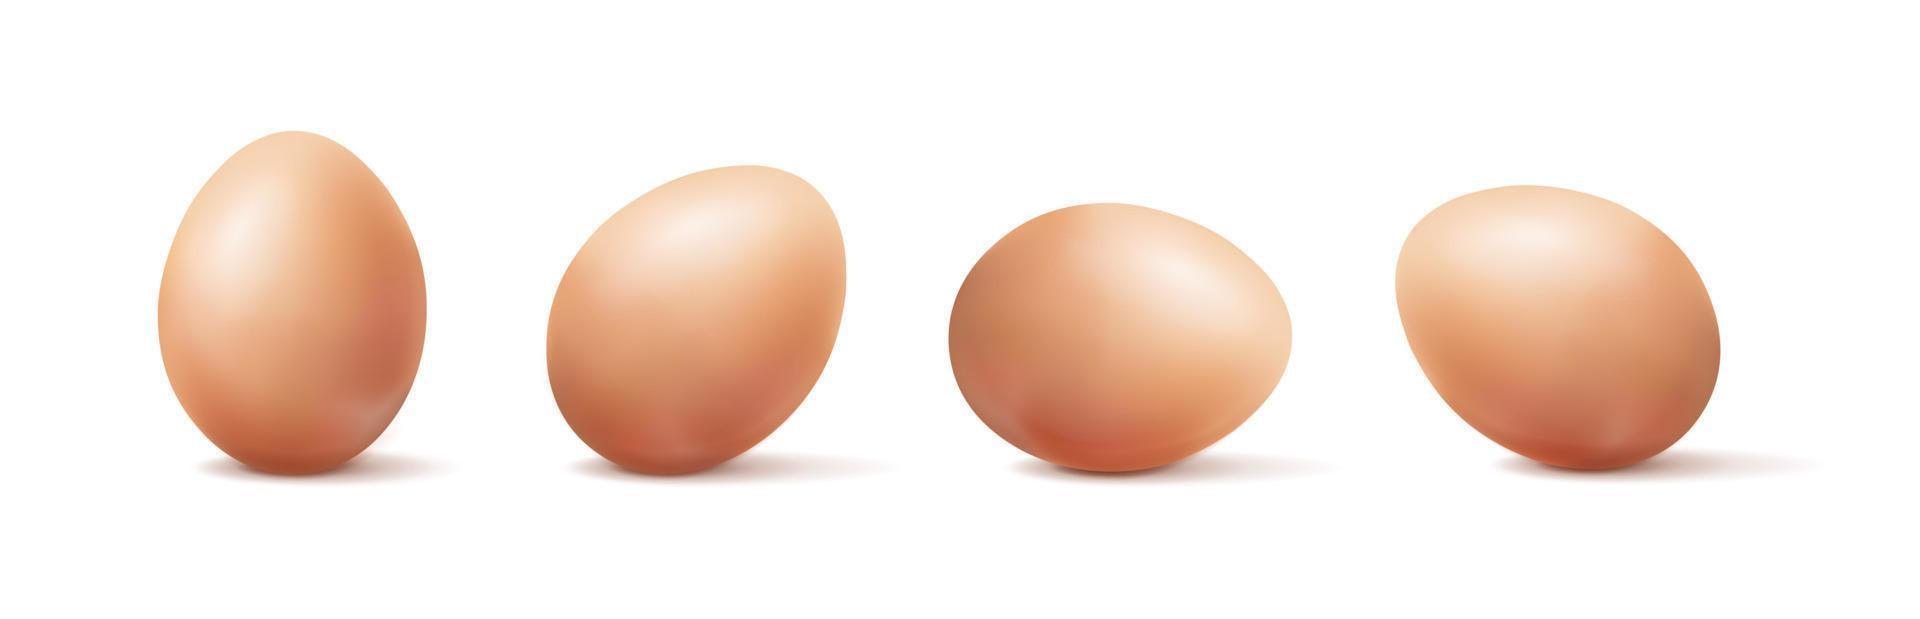 3d realistic vector icon illustration. Organic brown color eggs in different positions.